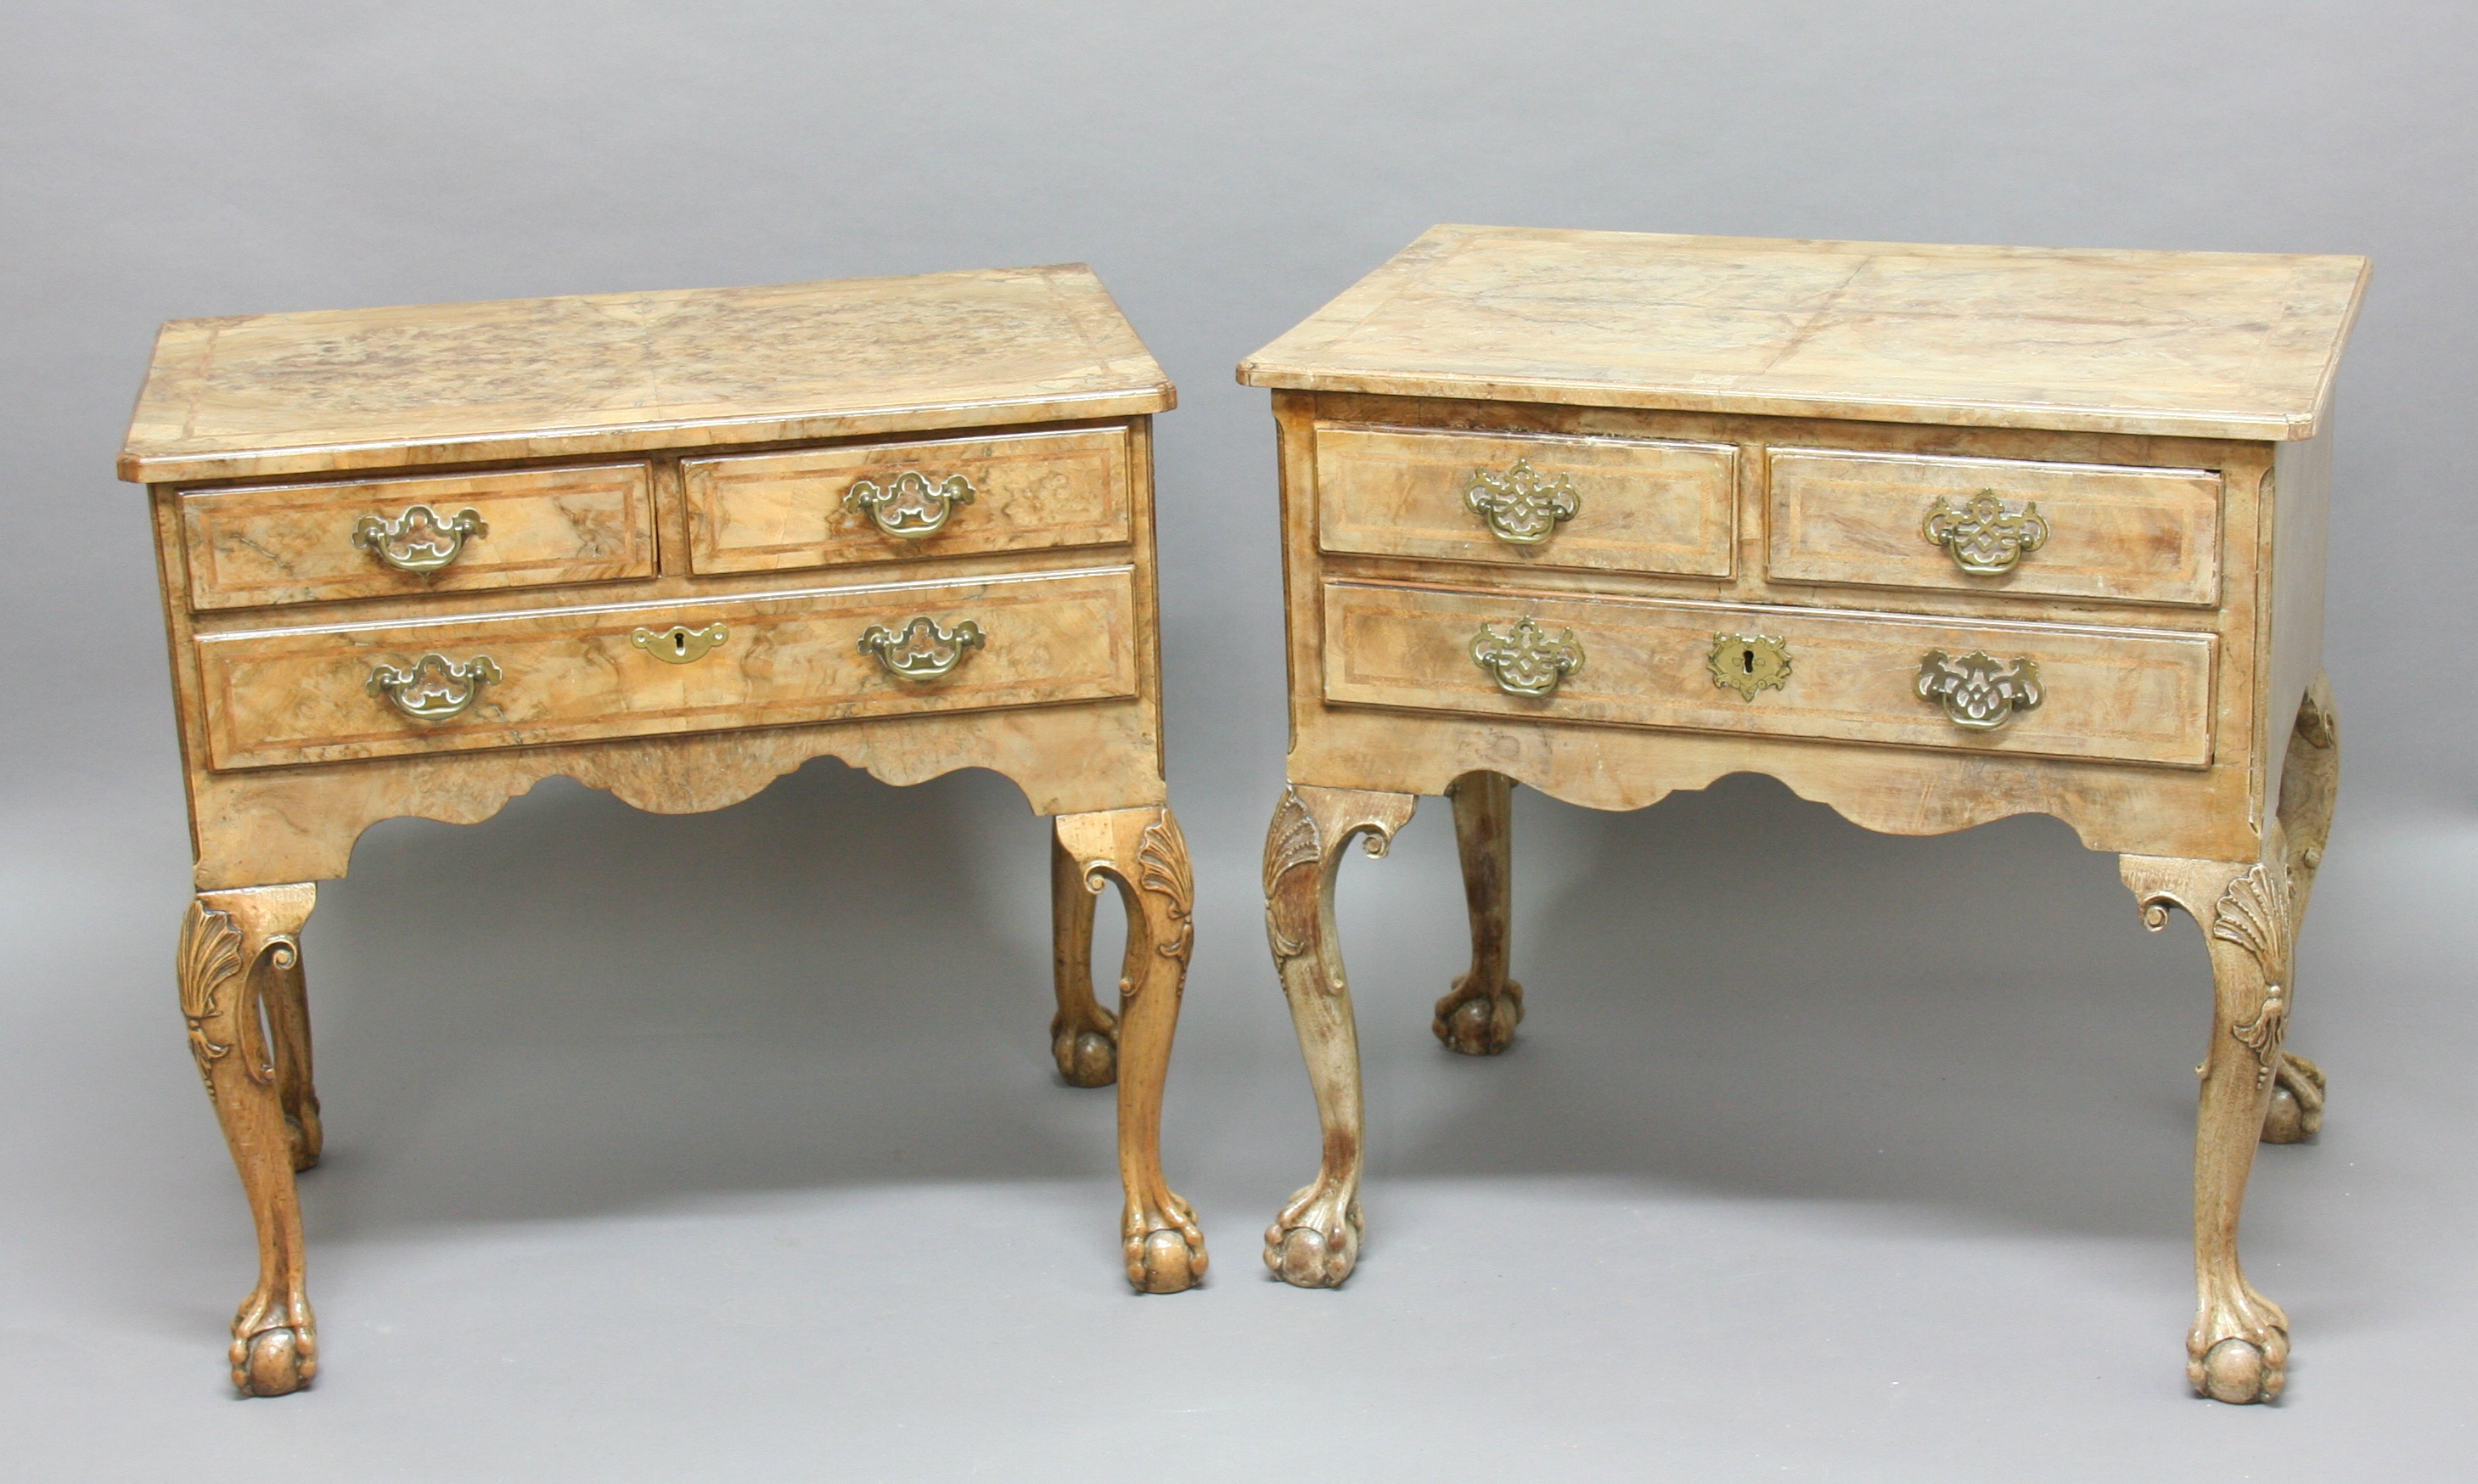 PAIR OF GEORGE II STYLE WALNUT LOW BOYS, two short and a long drawer with feather banding on